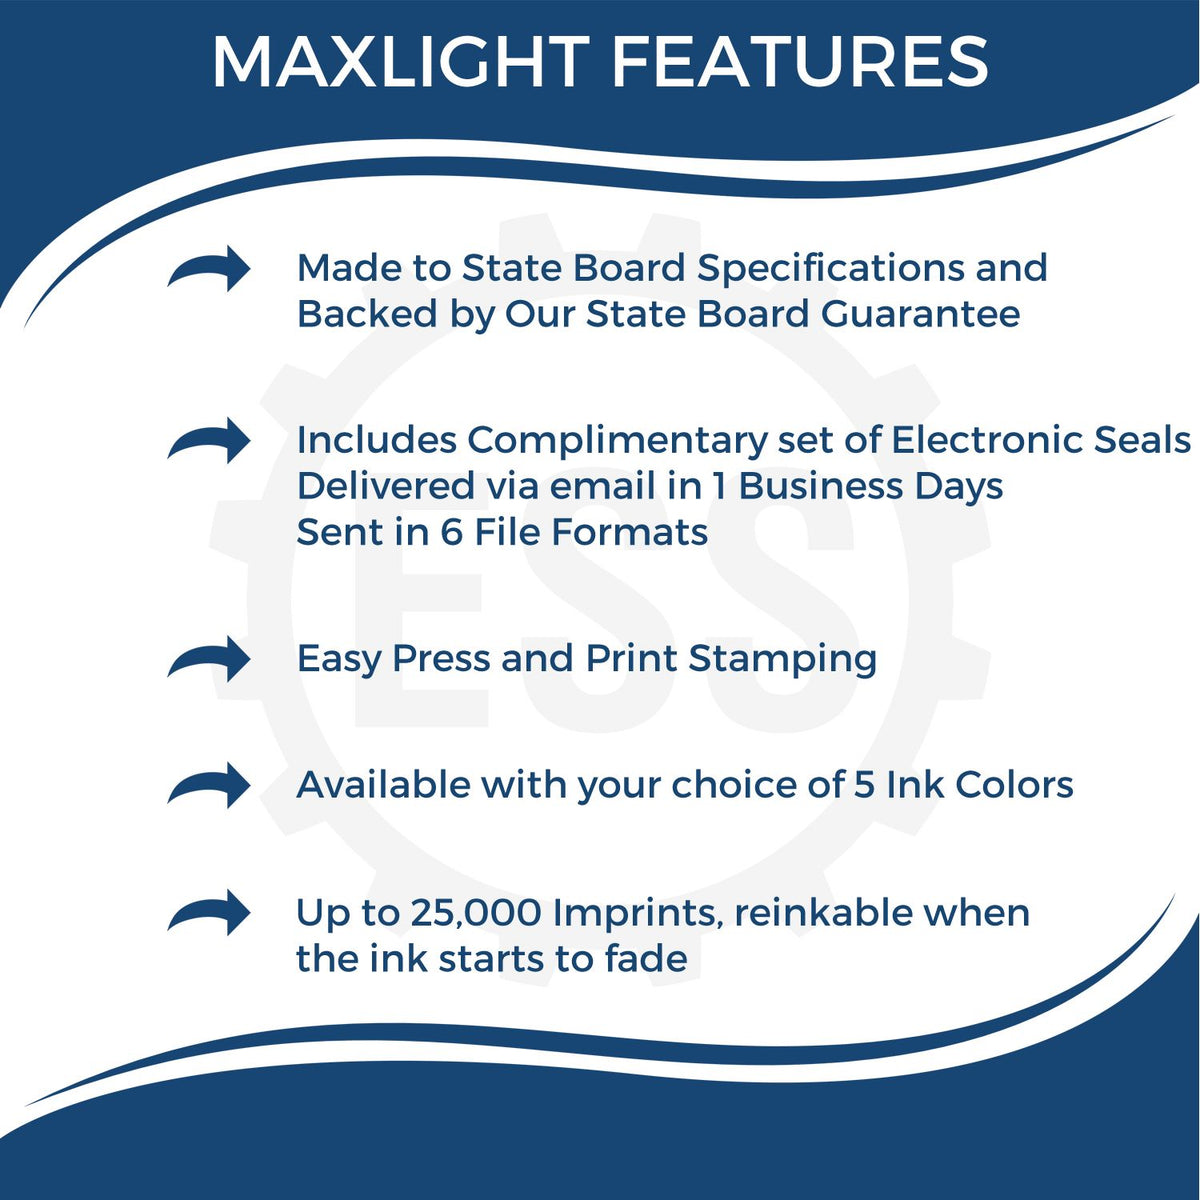 A picture of an infographic highlighting the selling points for the MaxLight Premium Pre-Inked Oregon Rectangular Notarial Stamp